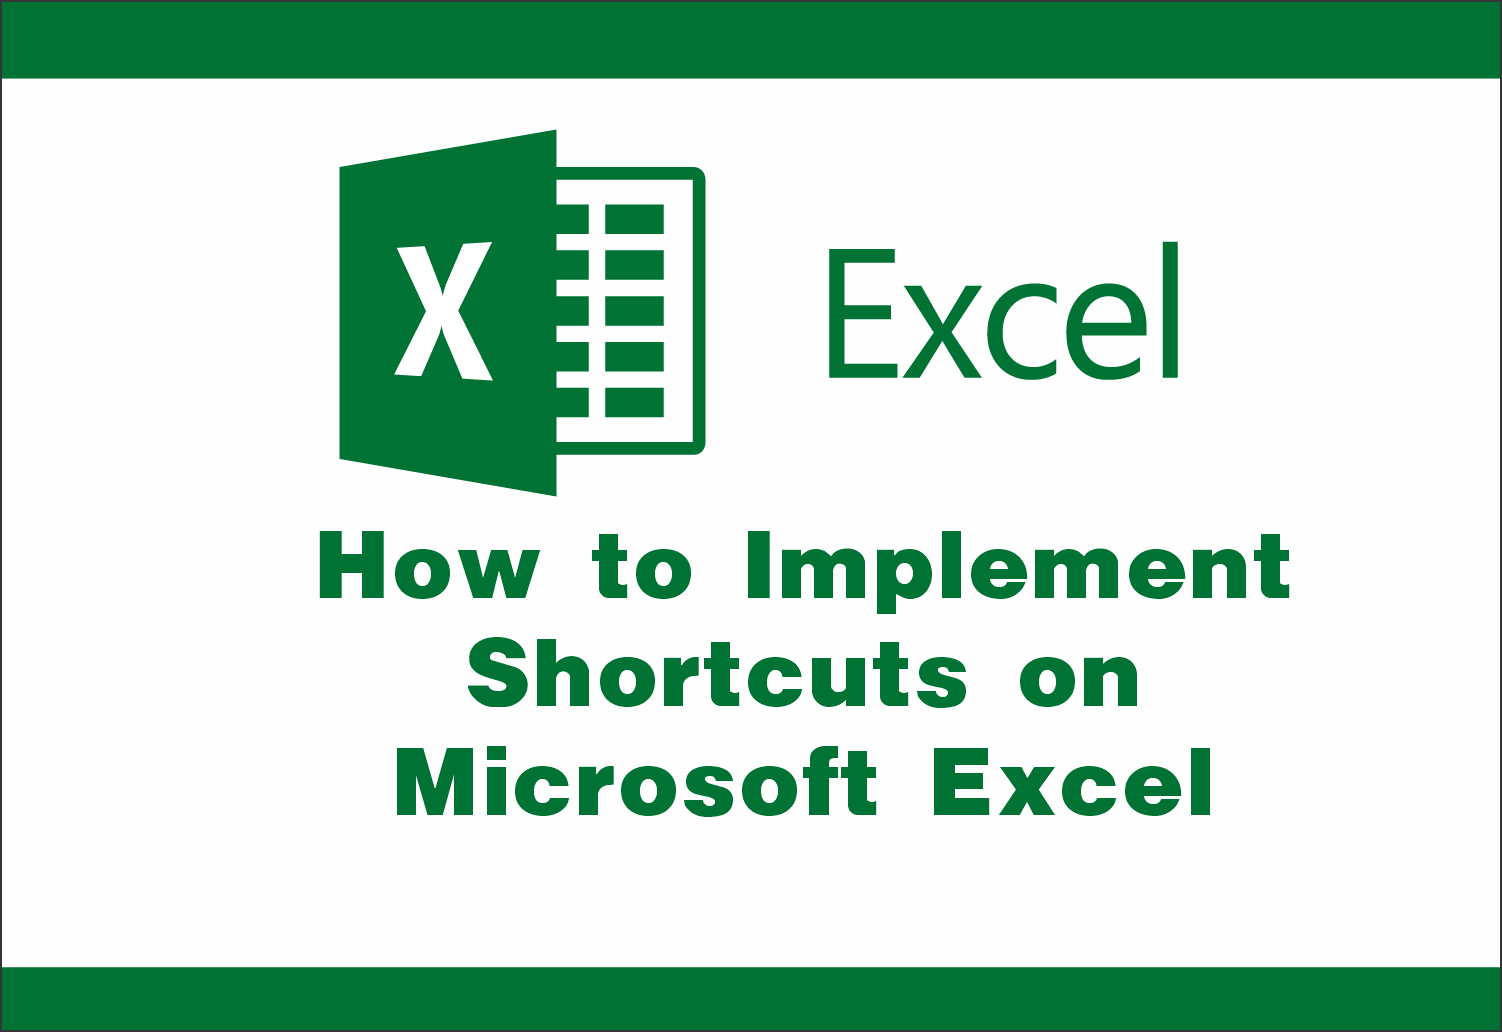 How to Implement Shortcuts on Microsoft Excel